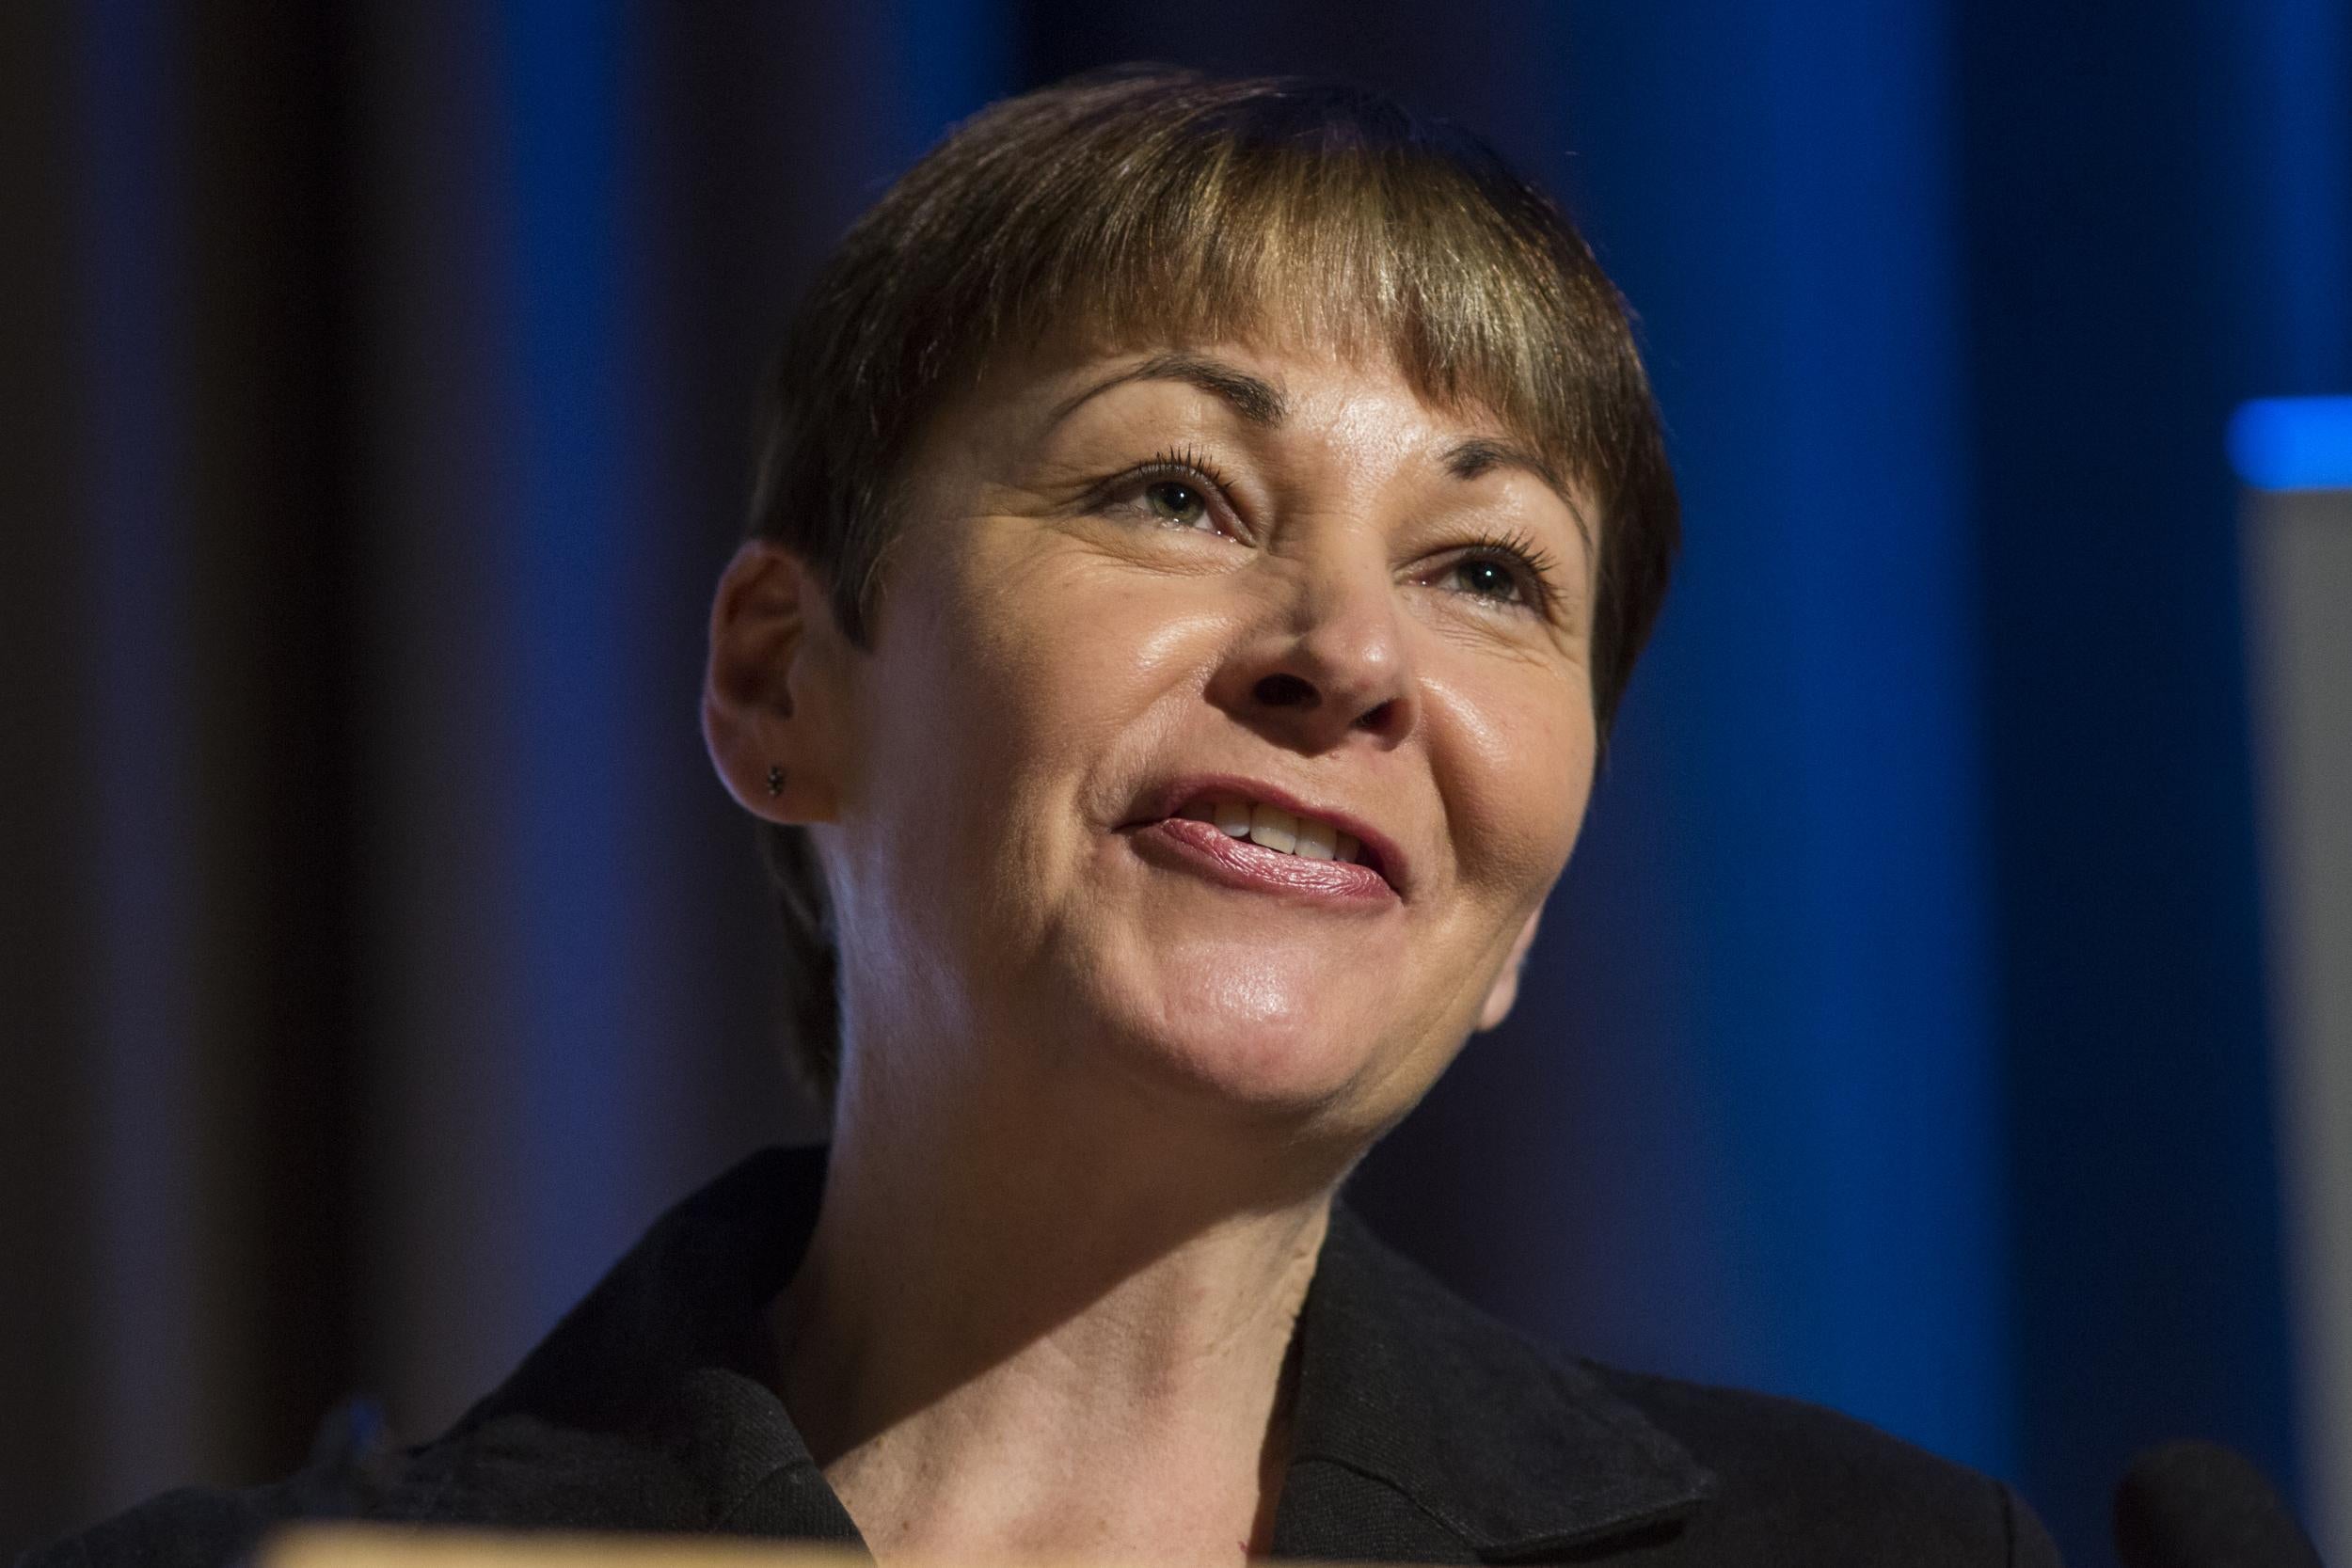 Caroline Lucas, the Green Party's co-leader, wants a vote in the UK